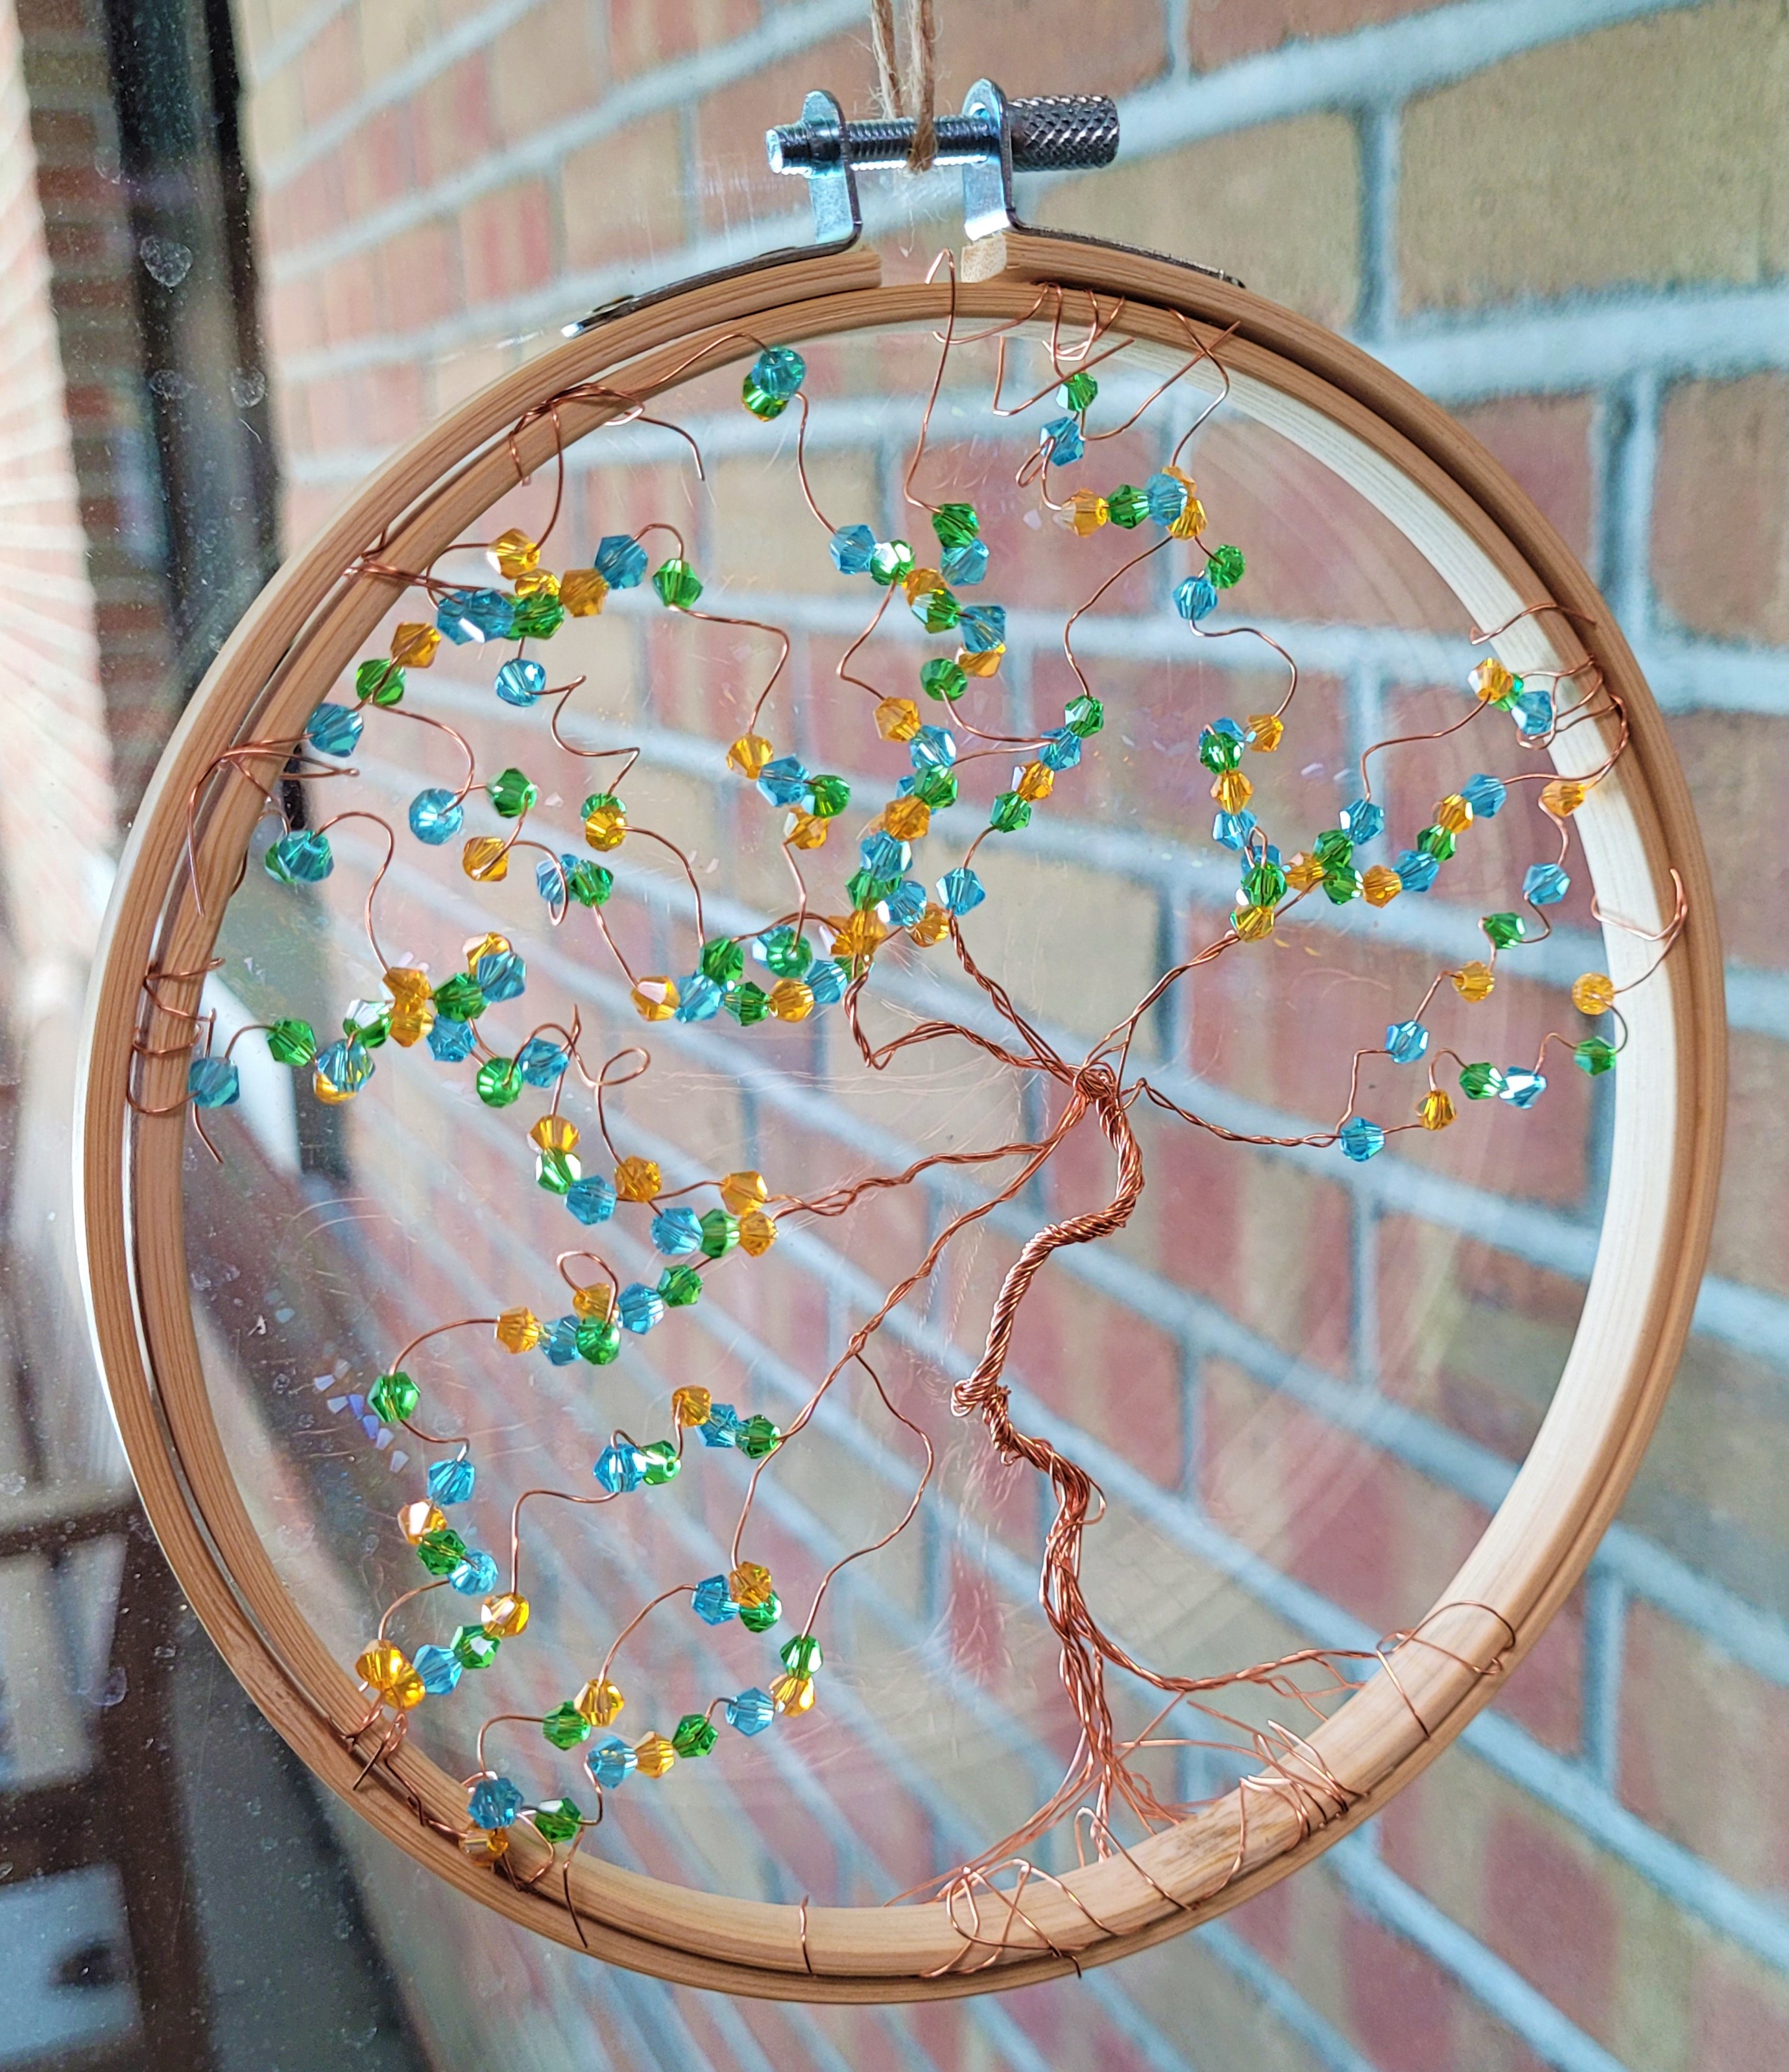 Sun Catcher made of embroidery hoop, wire, and colorful beads